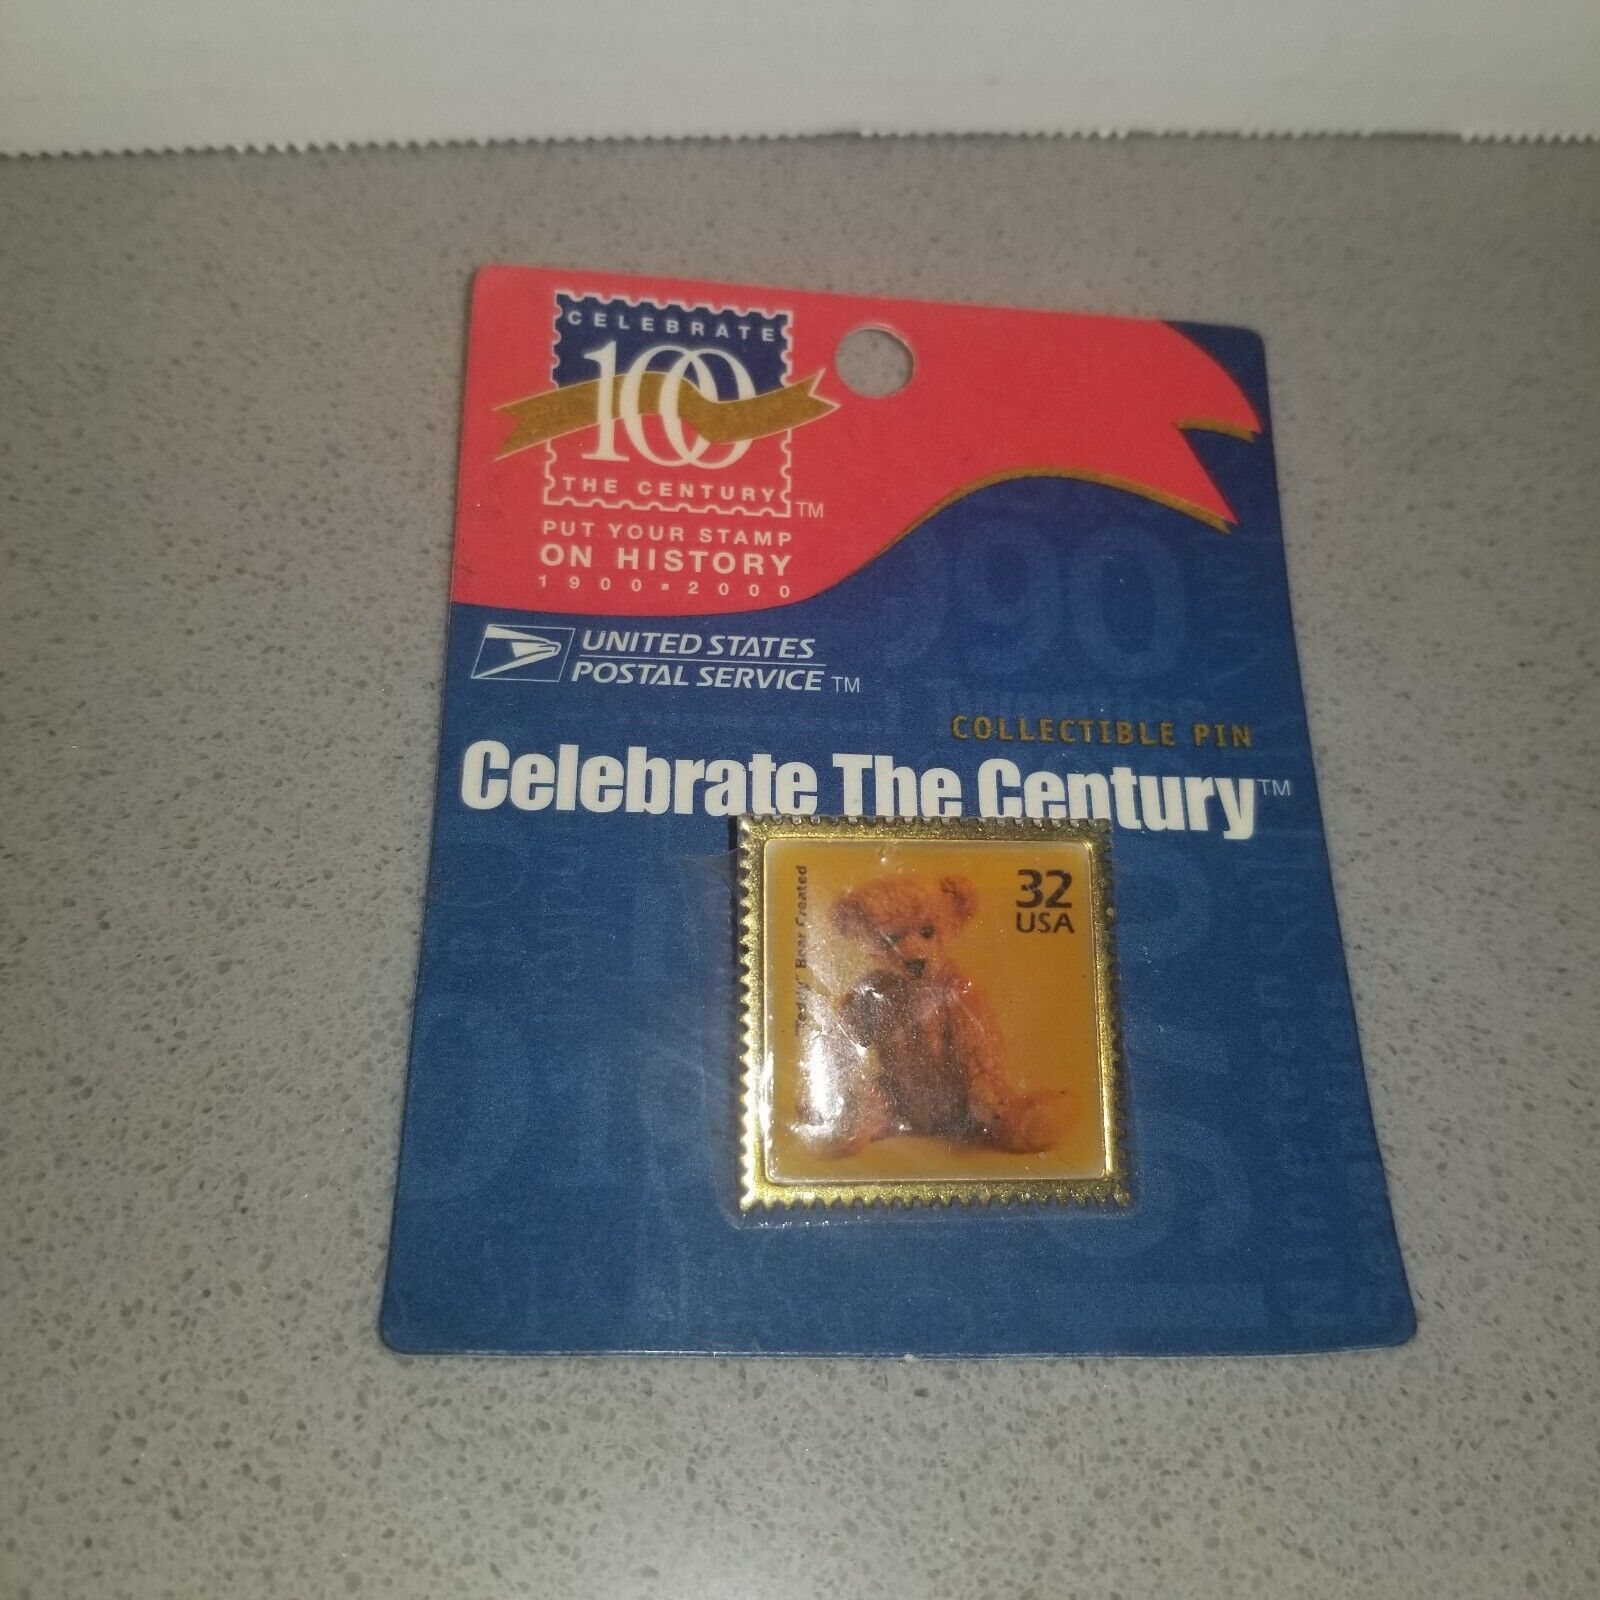 NEW 1998 USPS 32 cent Teddy Bear Collectible Pin Celebrate The Century USA - $7.69